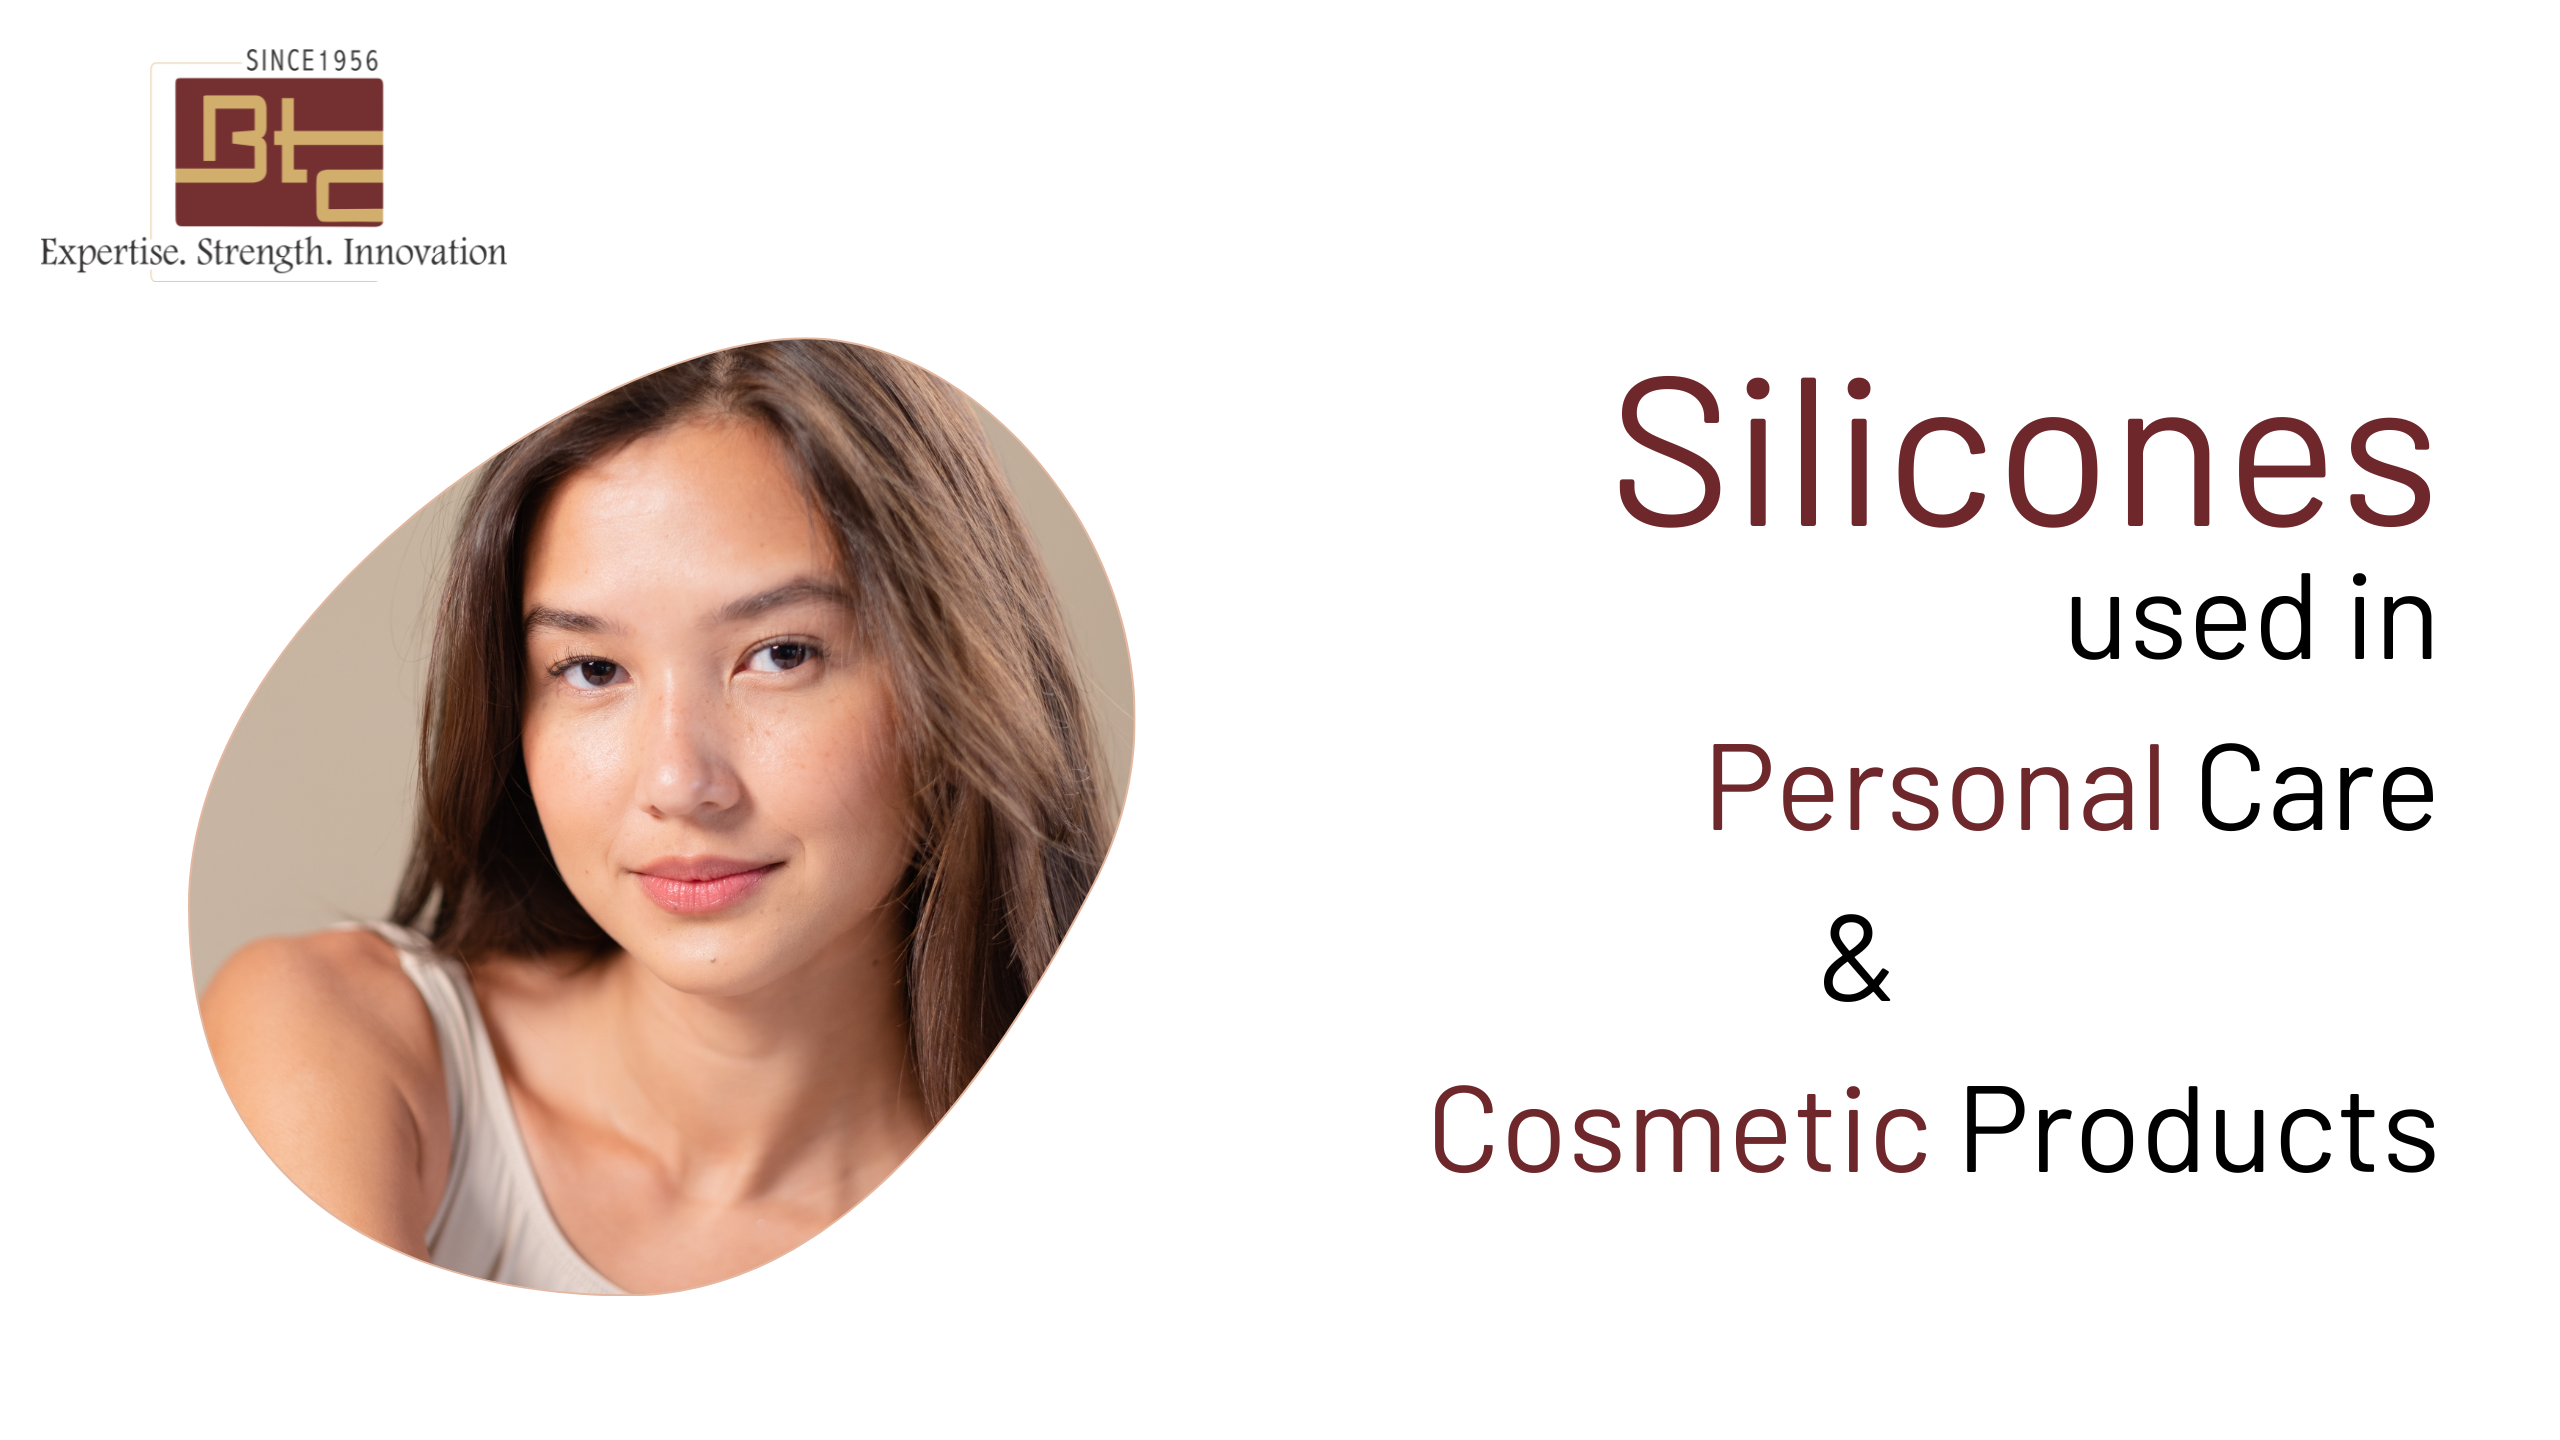 Silicones used in Personal Care & Cosmetics